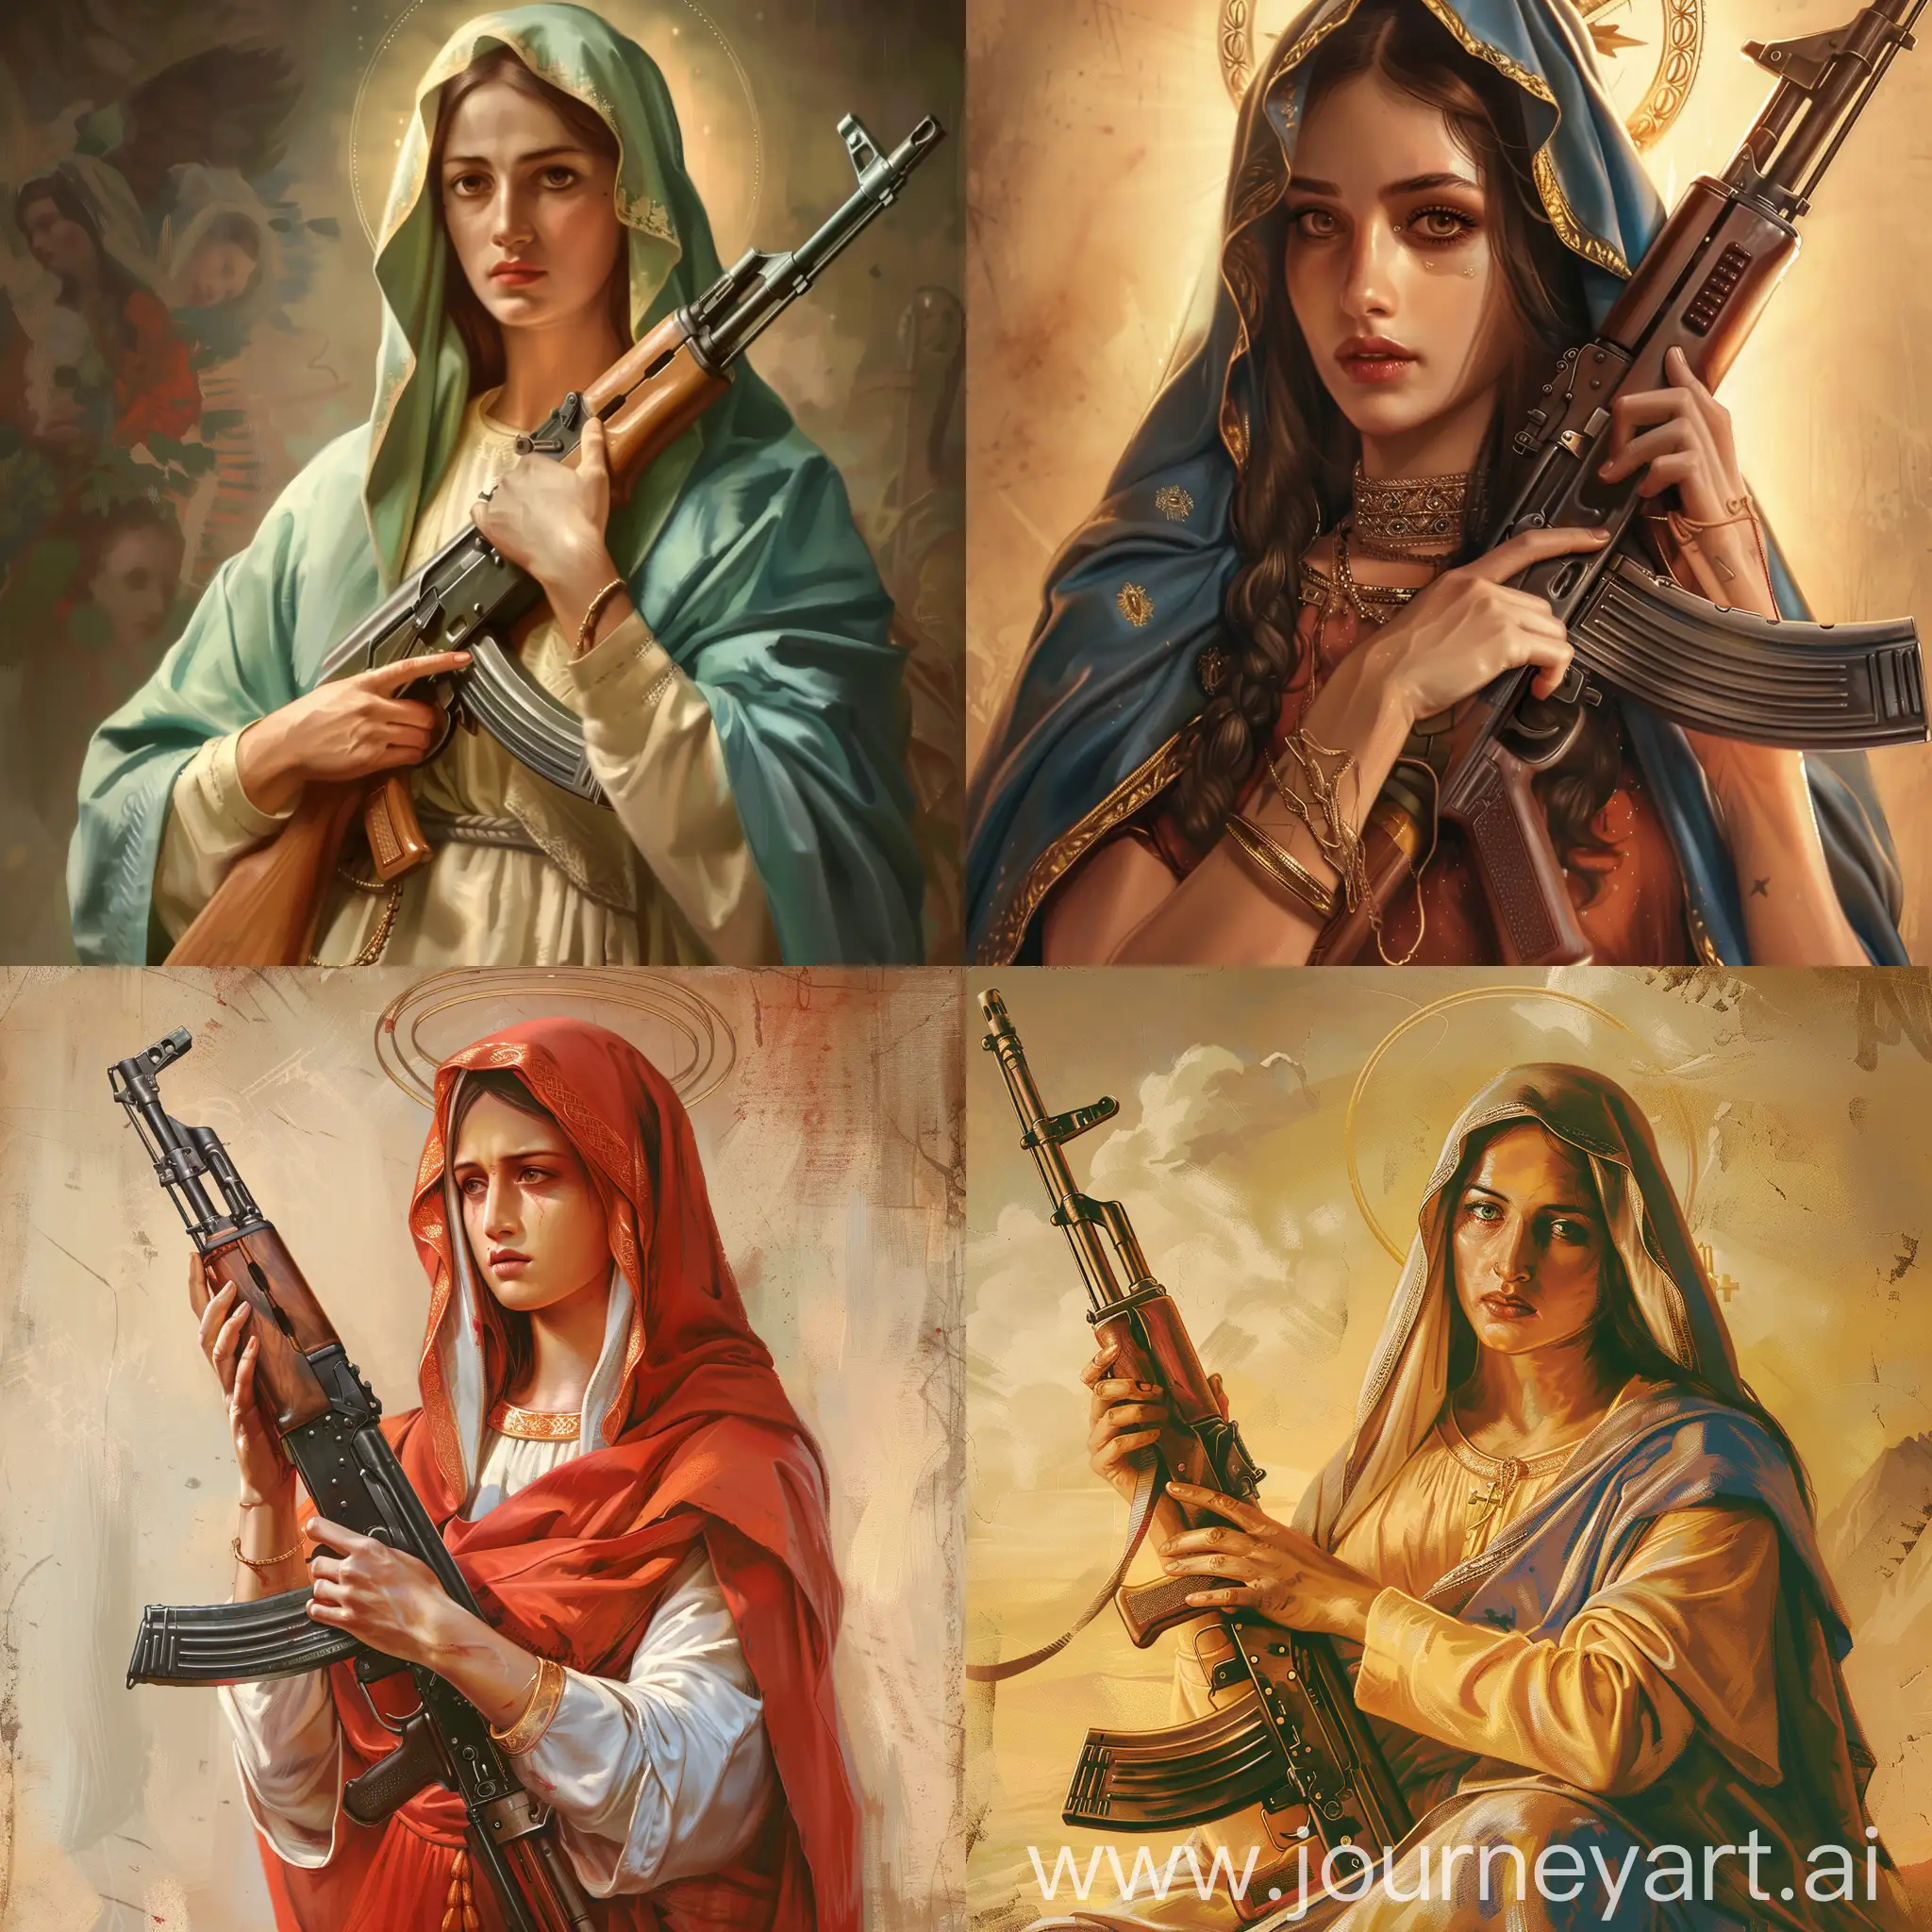 Powerful-Representation-of-the-Virgin-Mary-Holding-a-Large-AK47